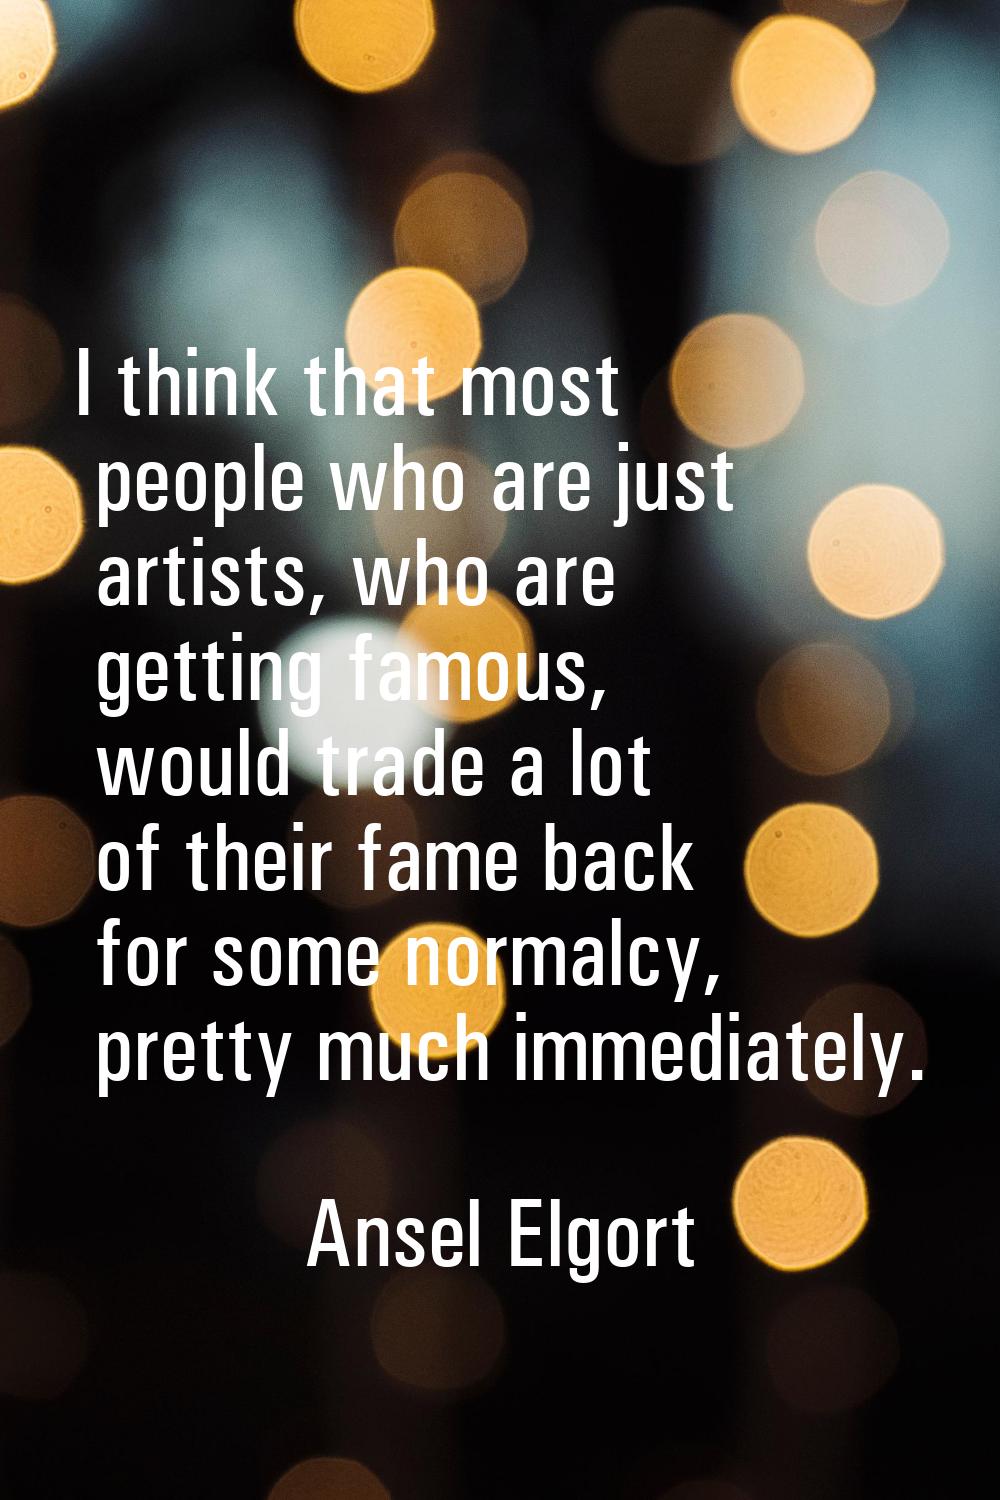 I think that most people who are just artists, who are getting famous, would trade a lot of their f